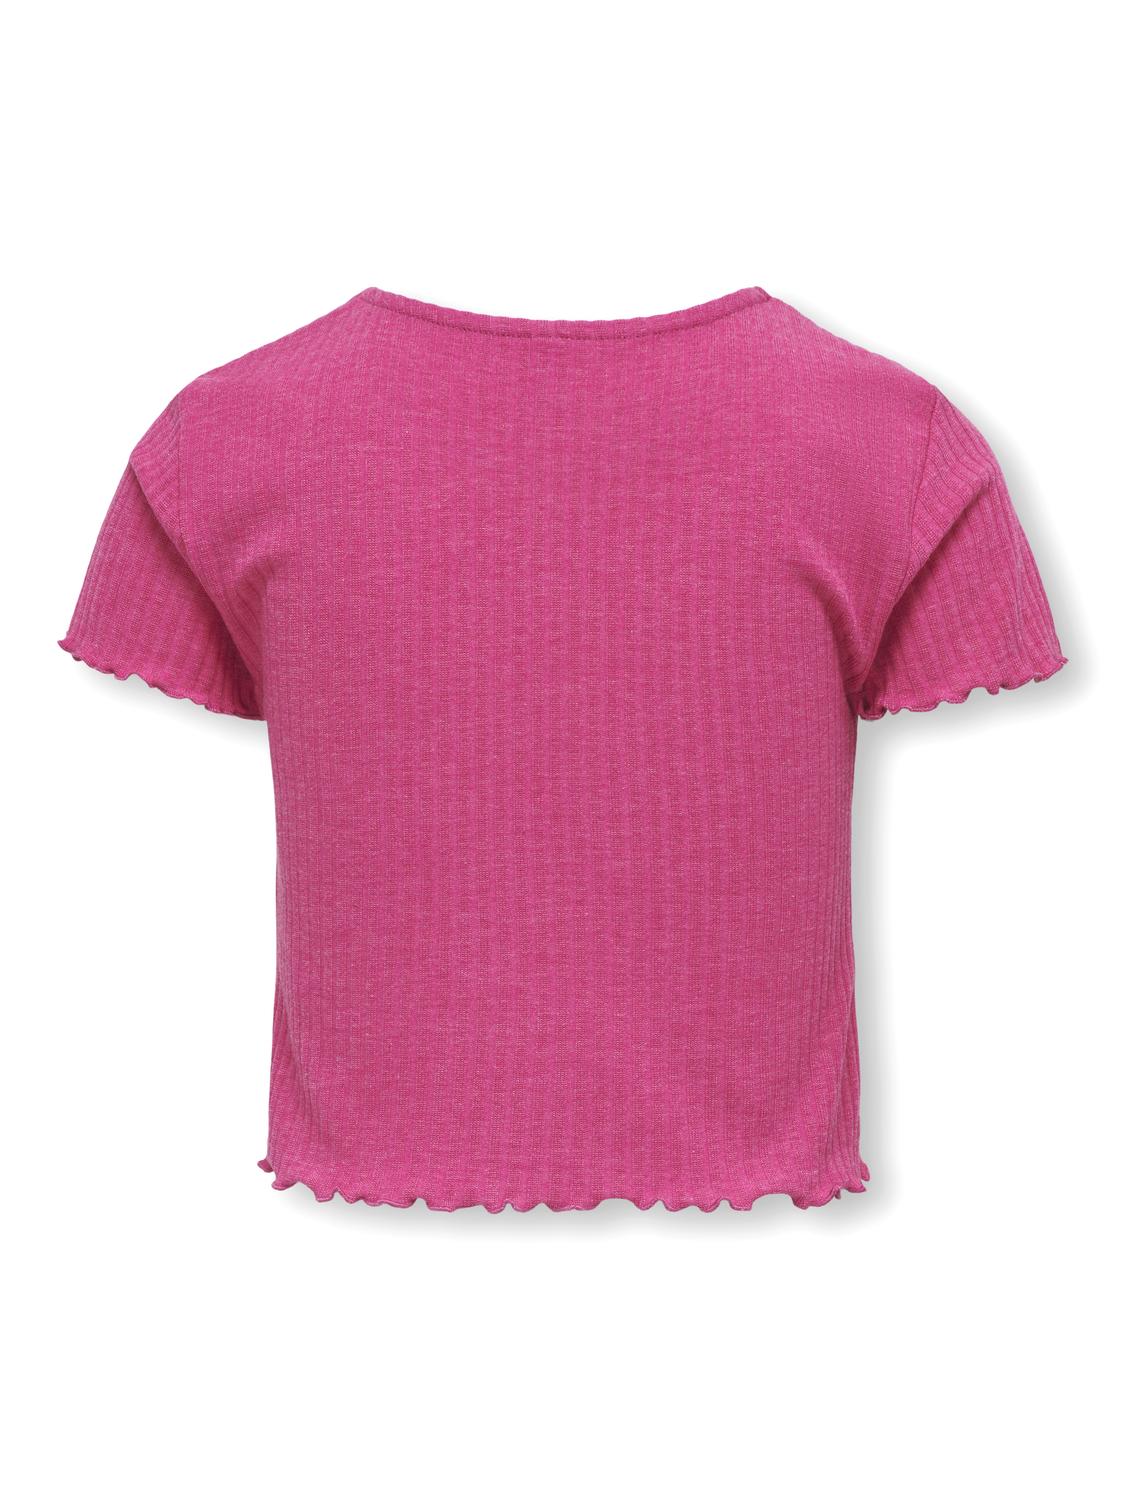 ONLY Stretch Fit Round Neck Top -Raspberry Rose - 15225338